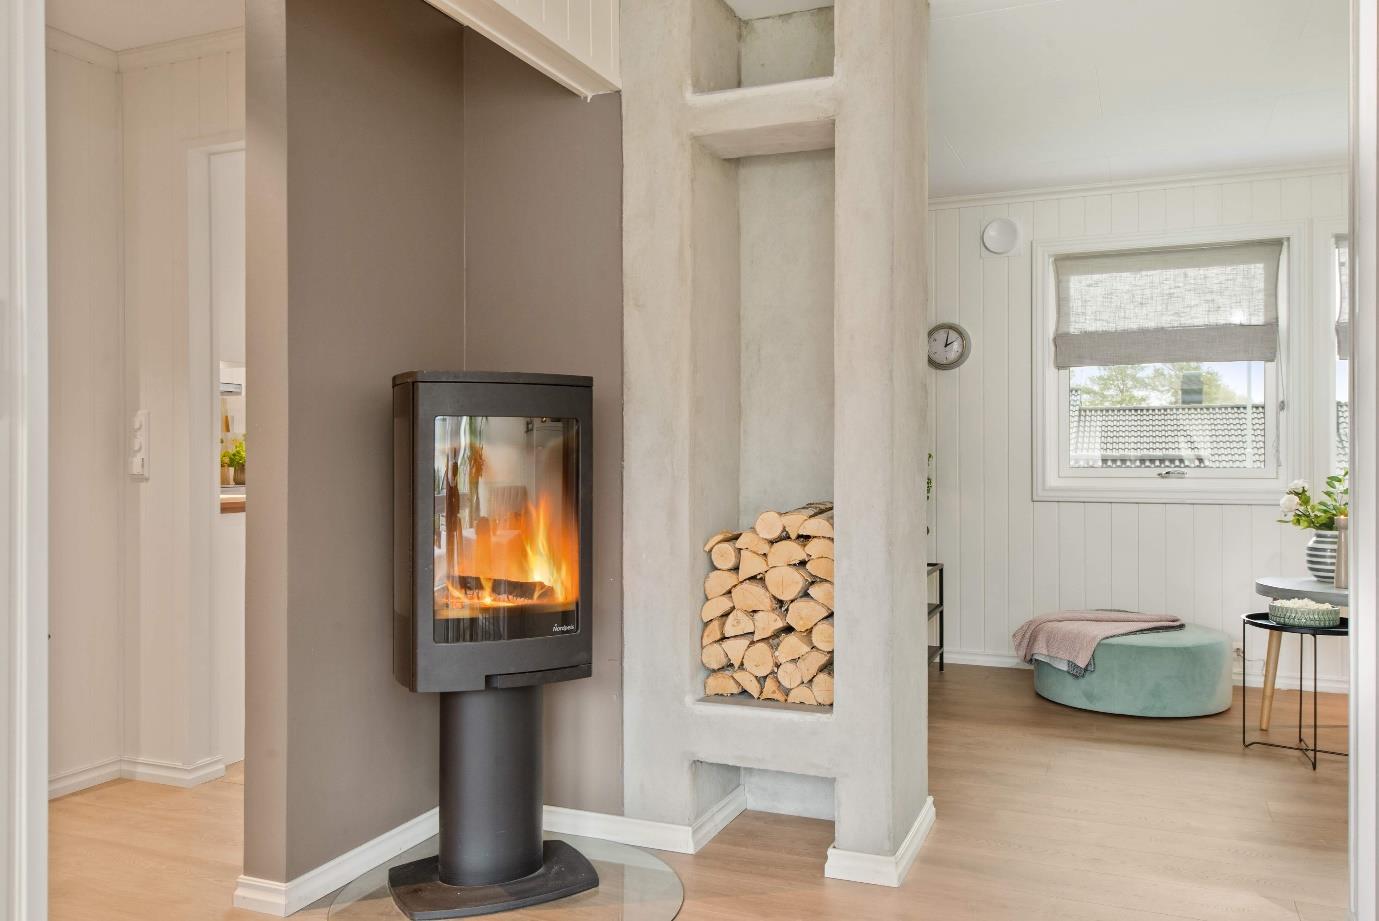 A fire place sitting in a room

Description automatically generated